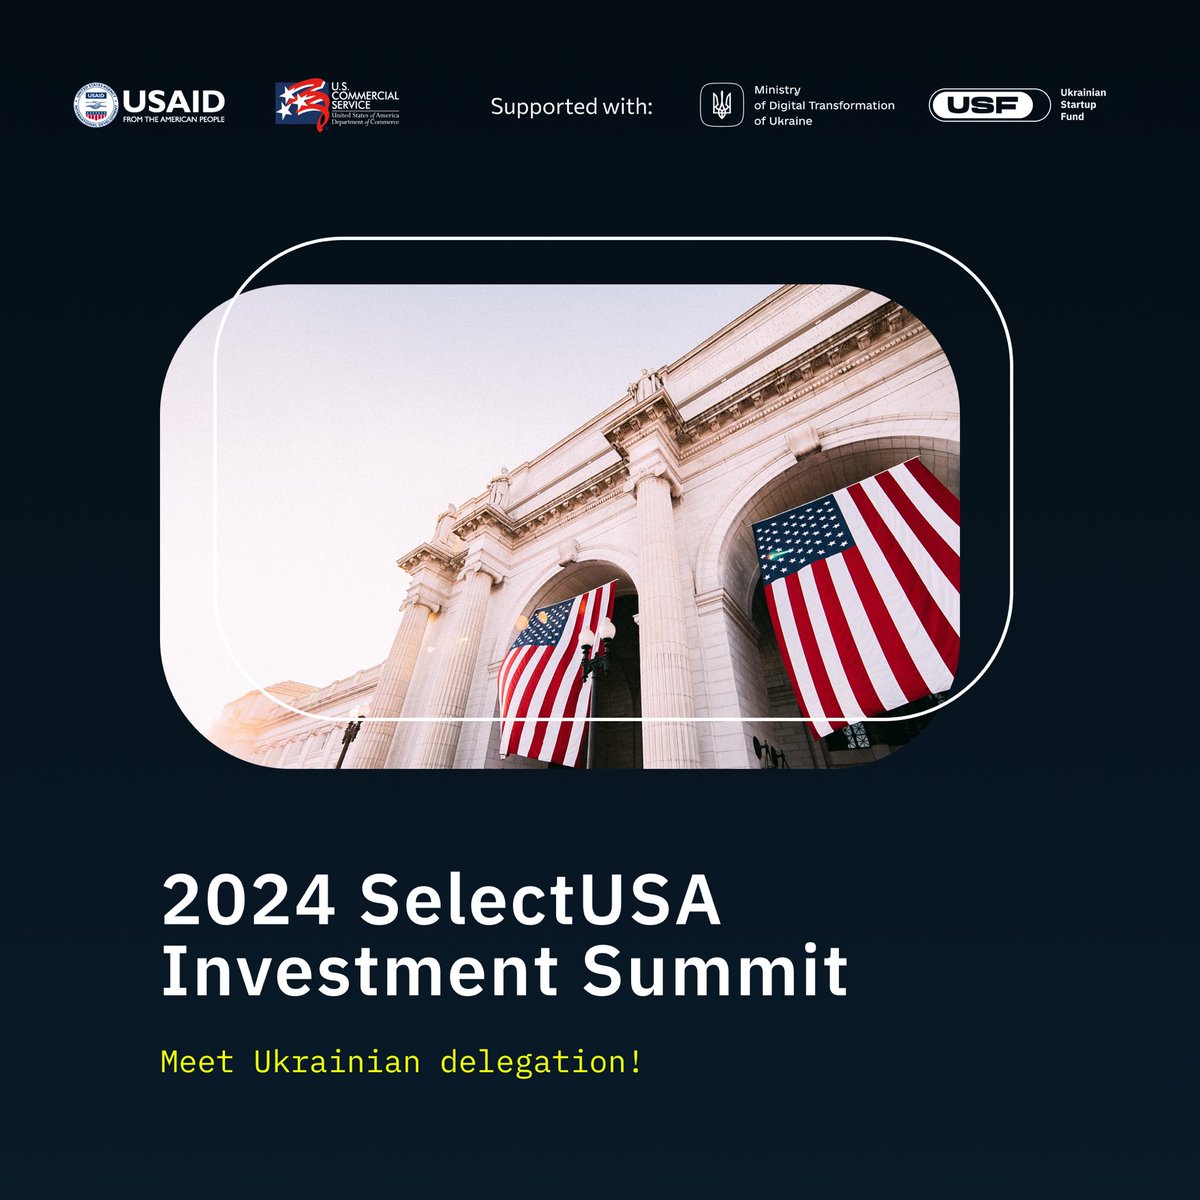 ⚡️15 remarkable Ukrainian startups have been chosen to showcase their innovation and potential at the 2024 SelectUSA Investment Summit! 

Check out the winners here 👉 bit.ly/44uJdea
 
#SelectUSA